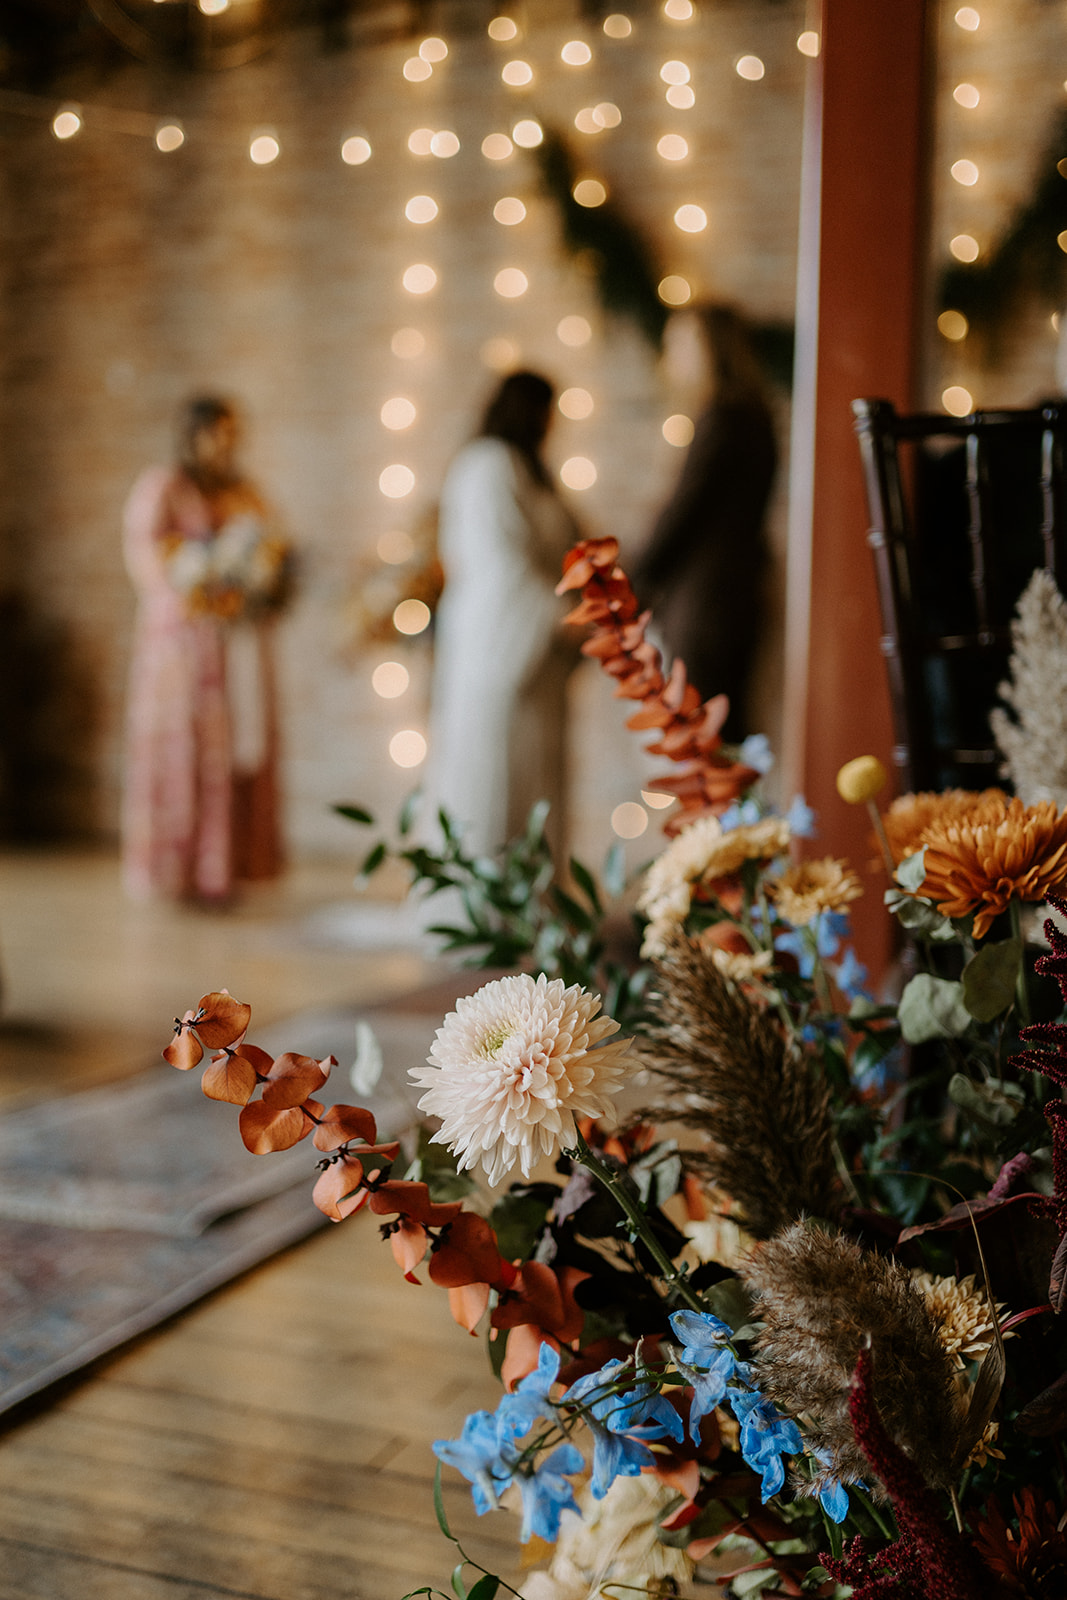 A large flower bouquet sitting on the floor with the bride and groom in the background.